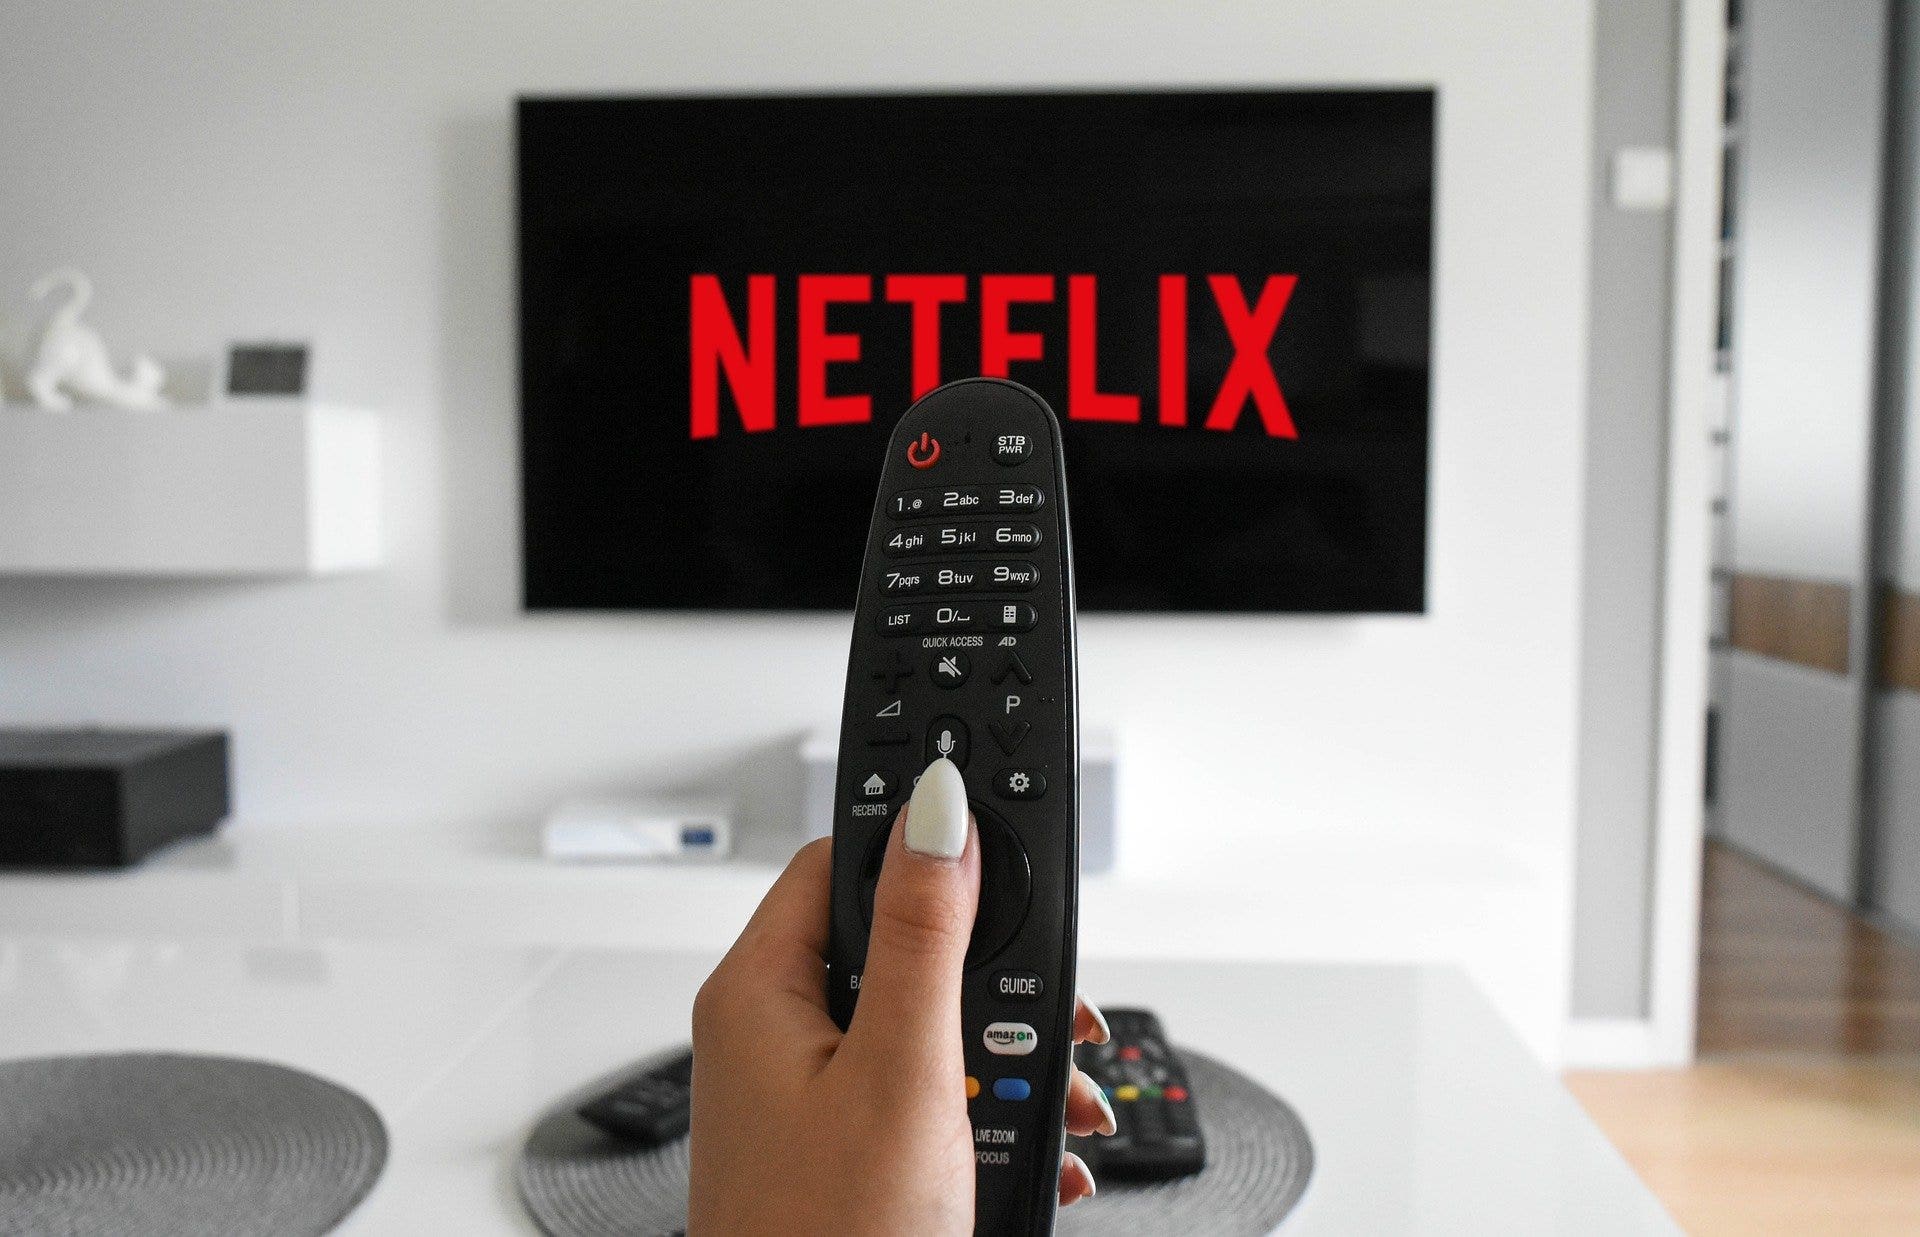 Is Netflix A 'De-Risked' Stock With Massive Upside Potential? This Investor Thinks So